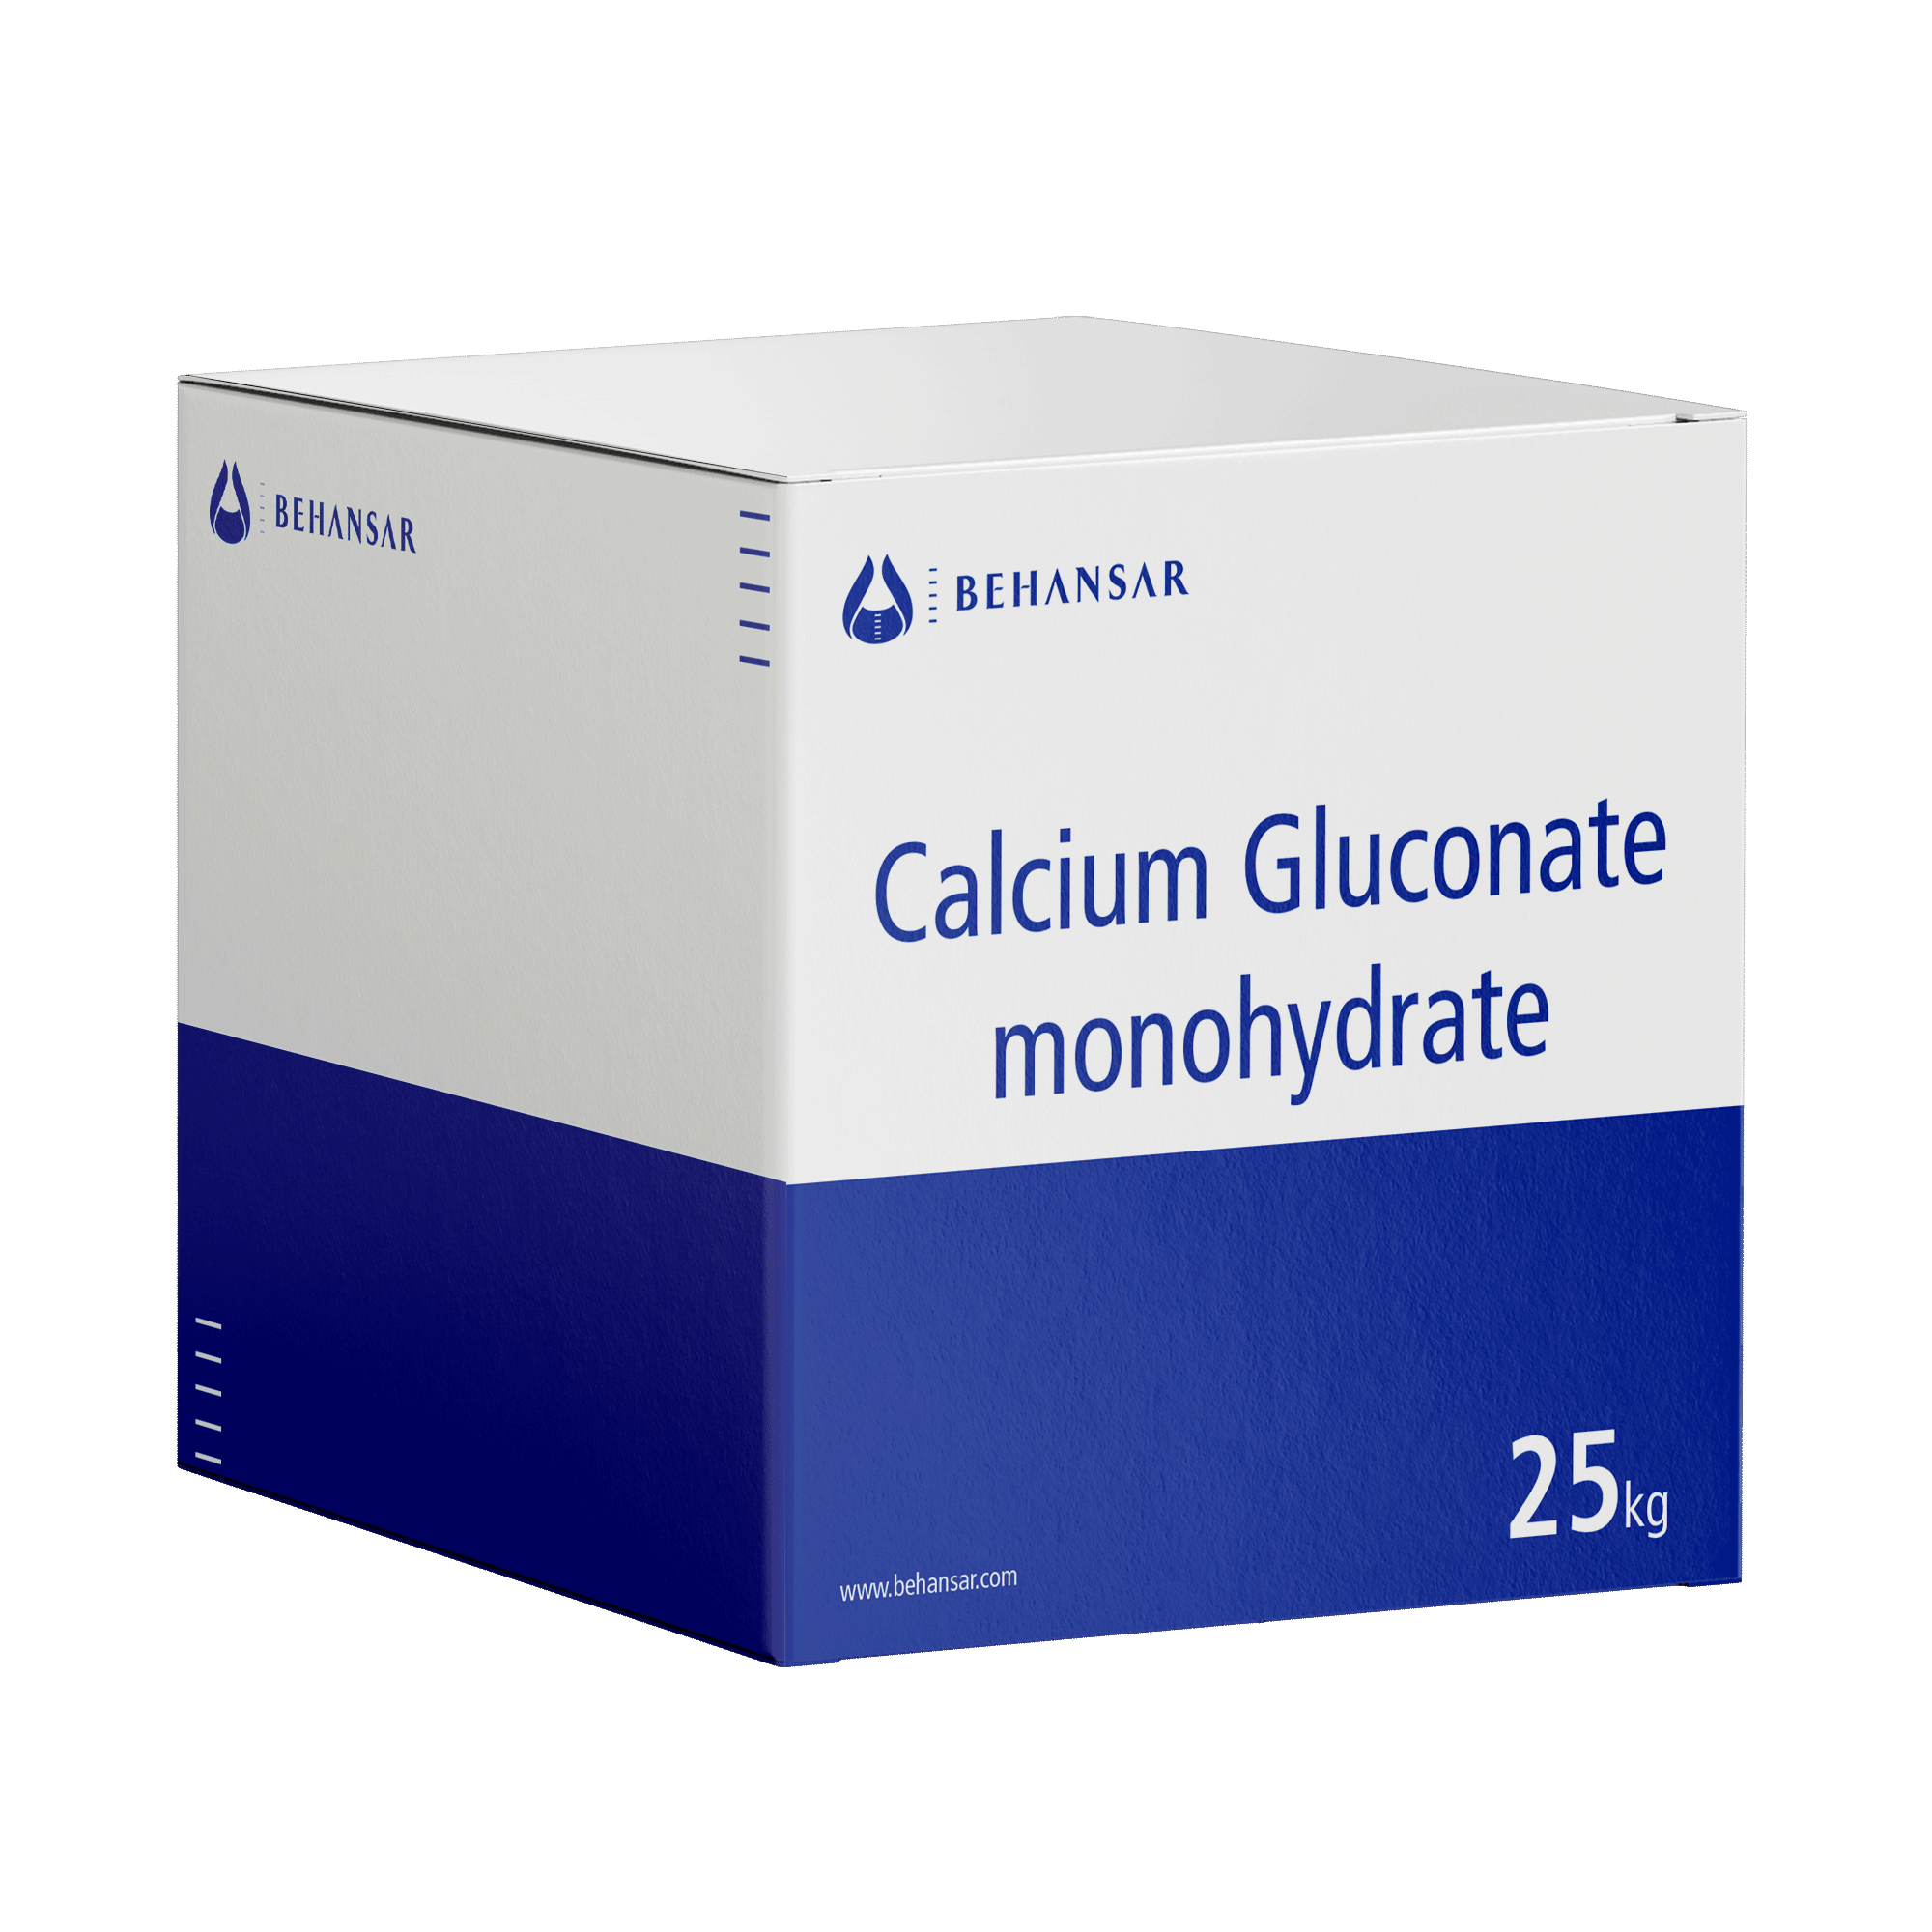 Calcium Gluconate monohydrate is one of the products of Behansar Co